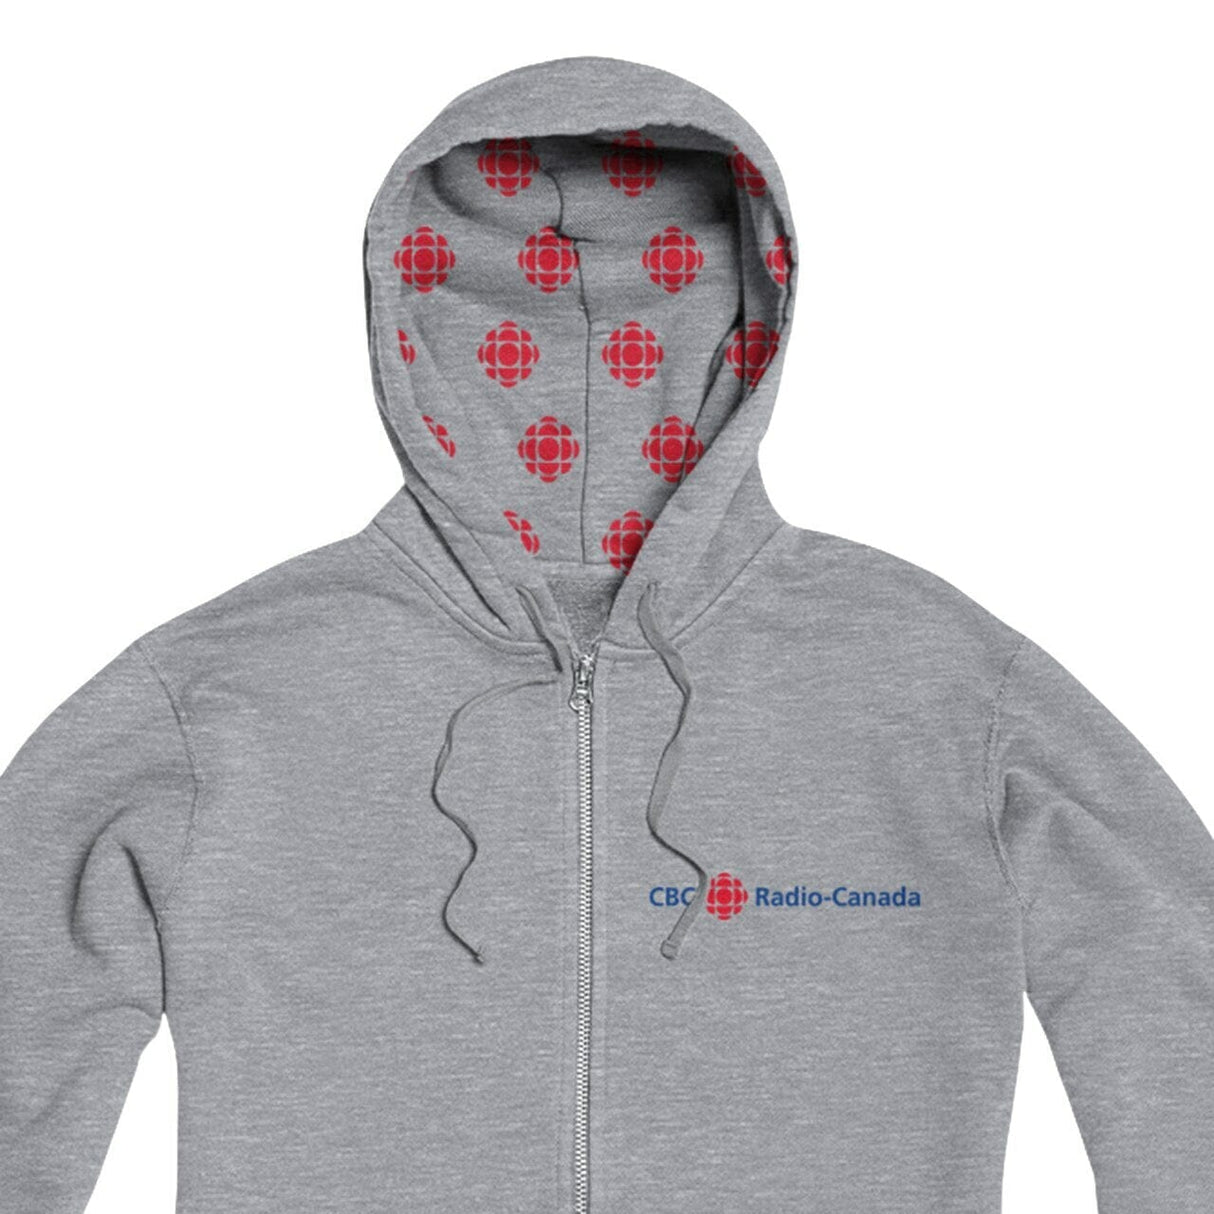 CBC Radio Canada Blue and Red Hood Pattern Zip Hoody